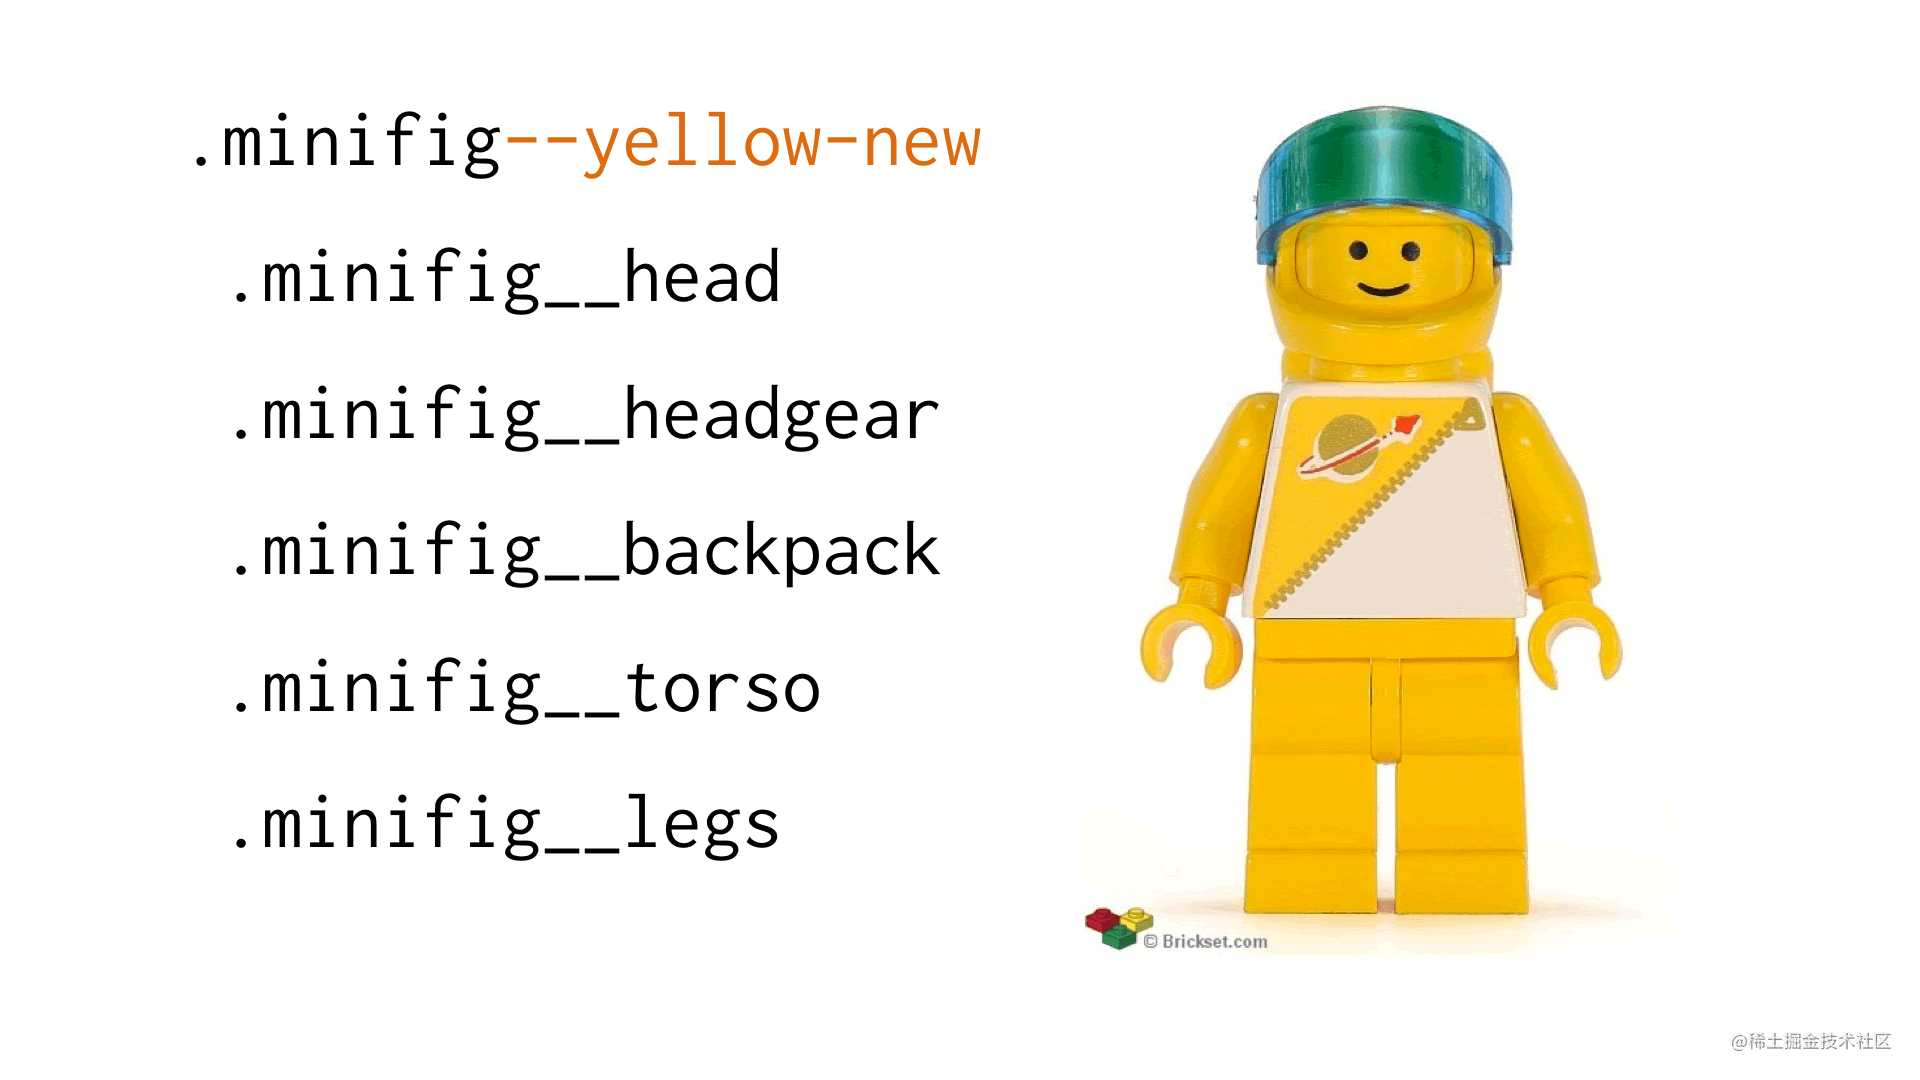 Example of a .minifig--yellow-new module modifier, turning the minifig yellow